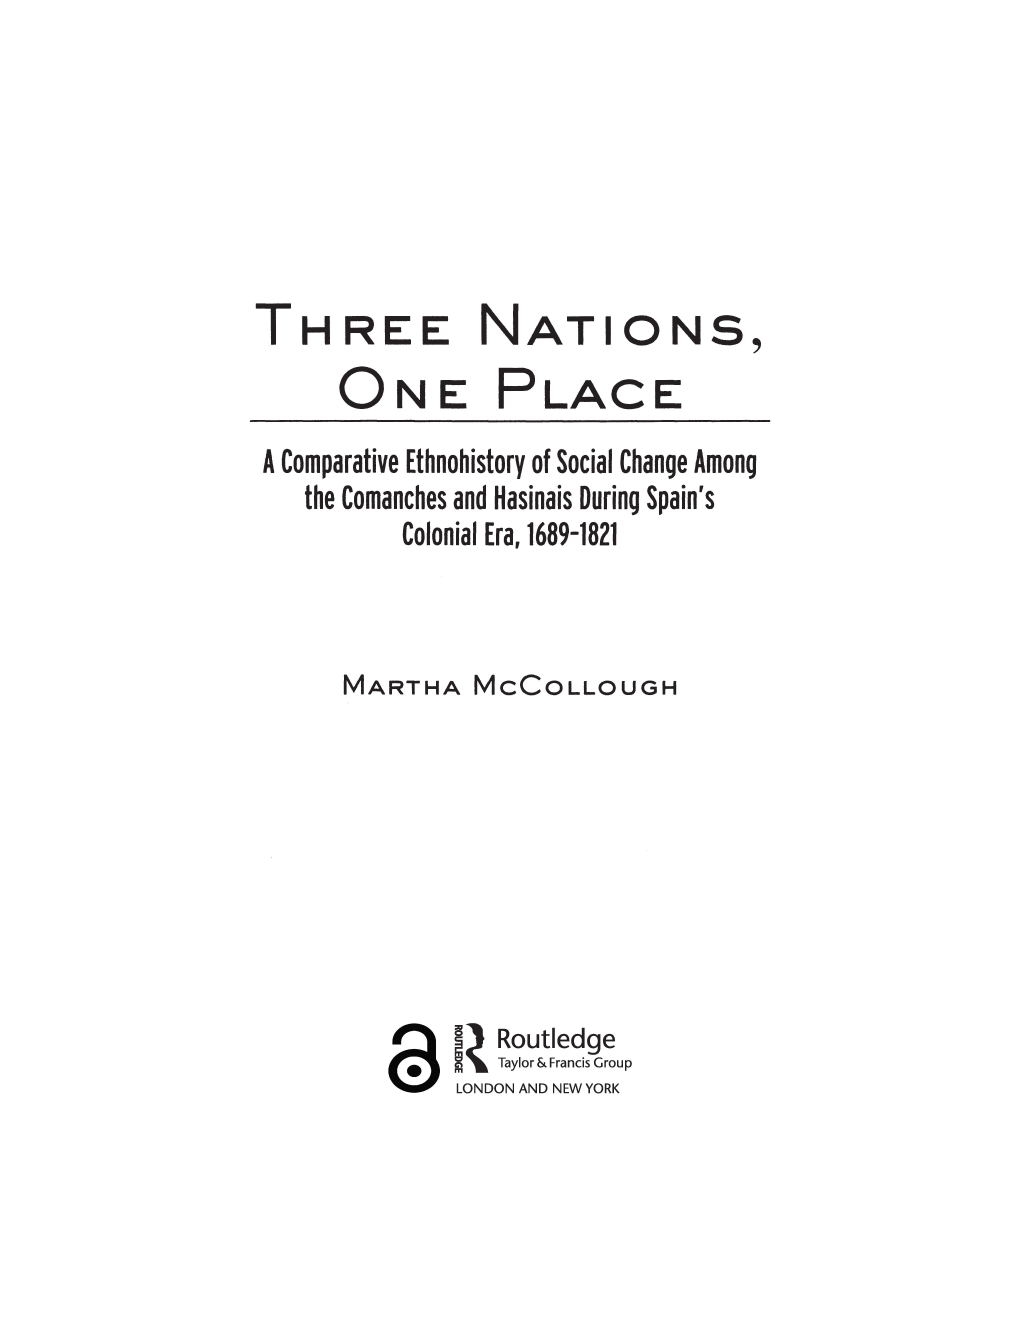 THREE NATIONS, ONE PLACE Acomparative Ethnohistory of Social Change Among the Comanches and Hasinais During Spain's Colonial Era, 1689-1821